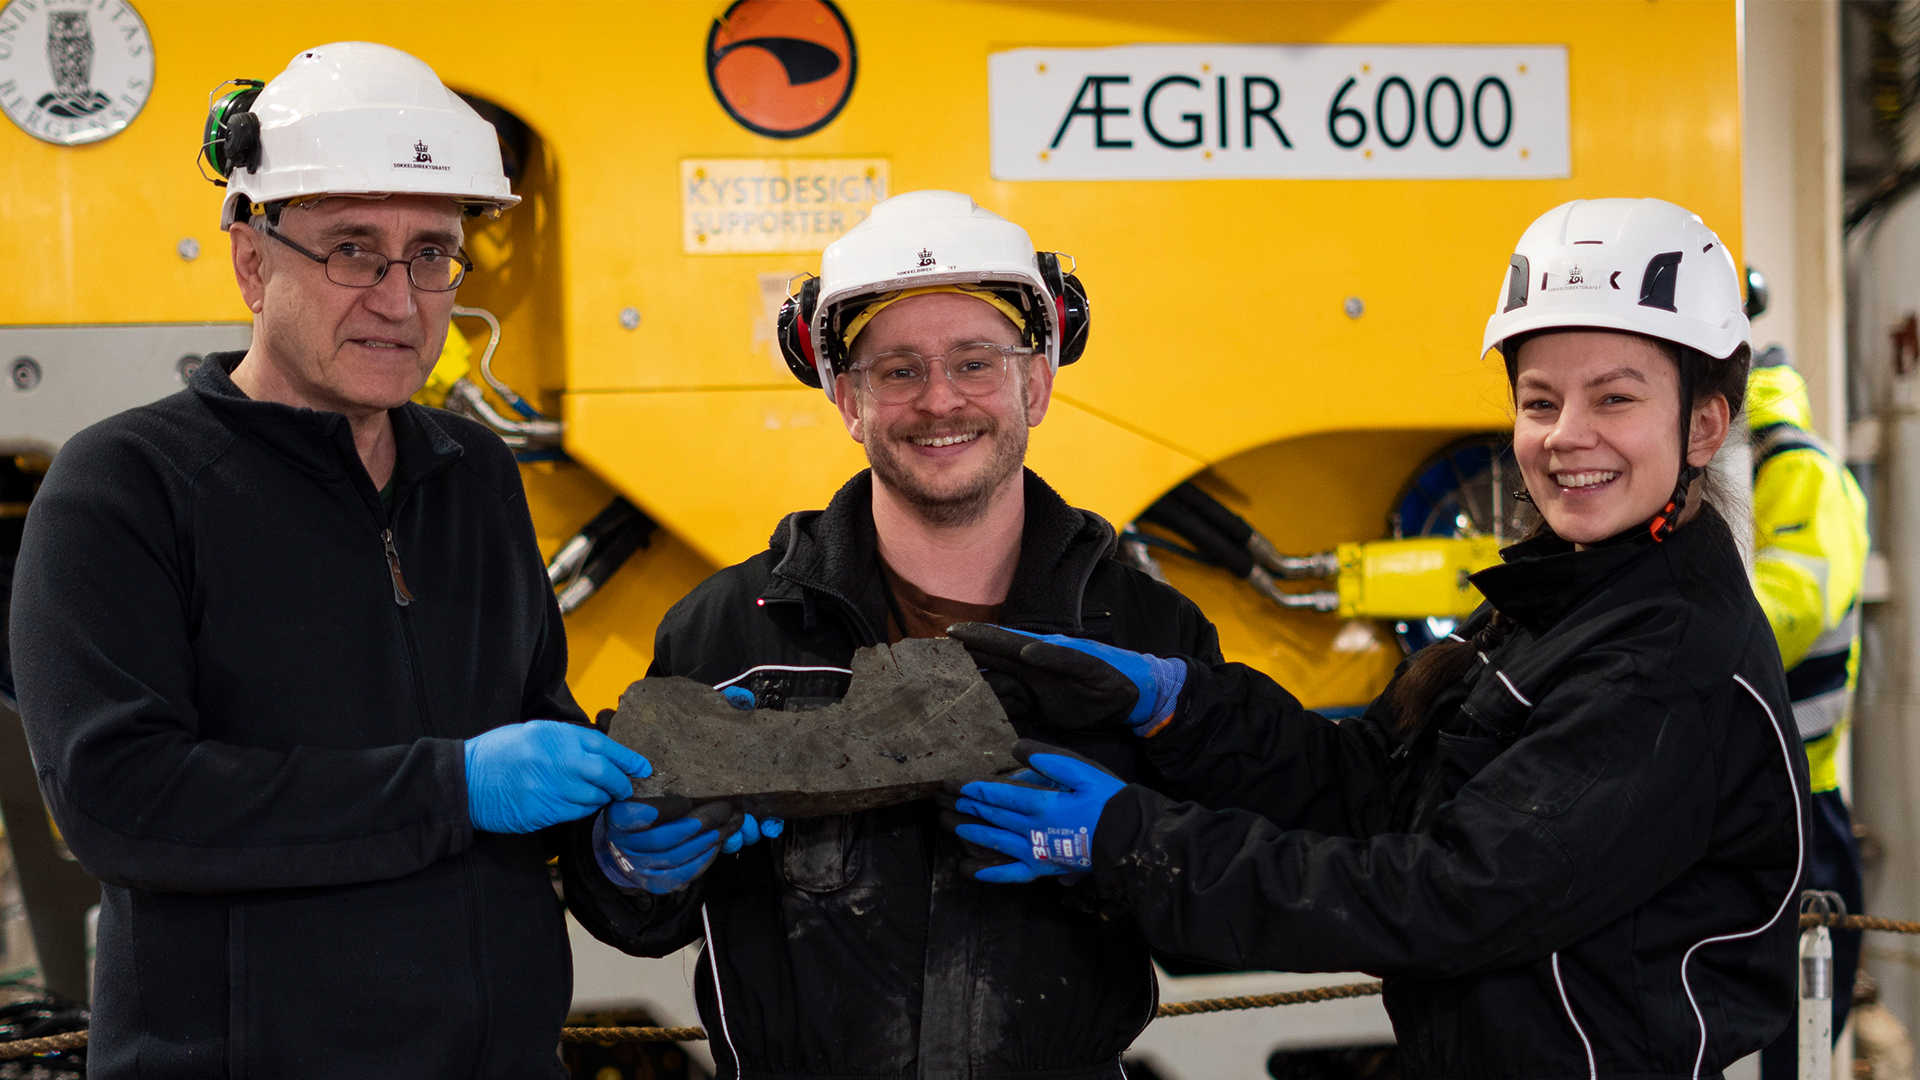 Seabed mineral sample number 1000 is a fact after several years of seabed mapping. The sample was retrieved on an expedition this winter, where the Norwegian Offshore Directorate's Jan Stenløkk, Jørgen Vadla and Rosalyn Fredriksen participated. (Photo: the Norwegian Offshore Directorate)